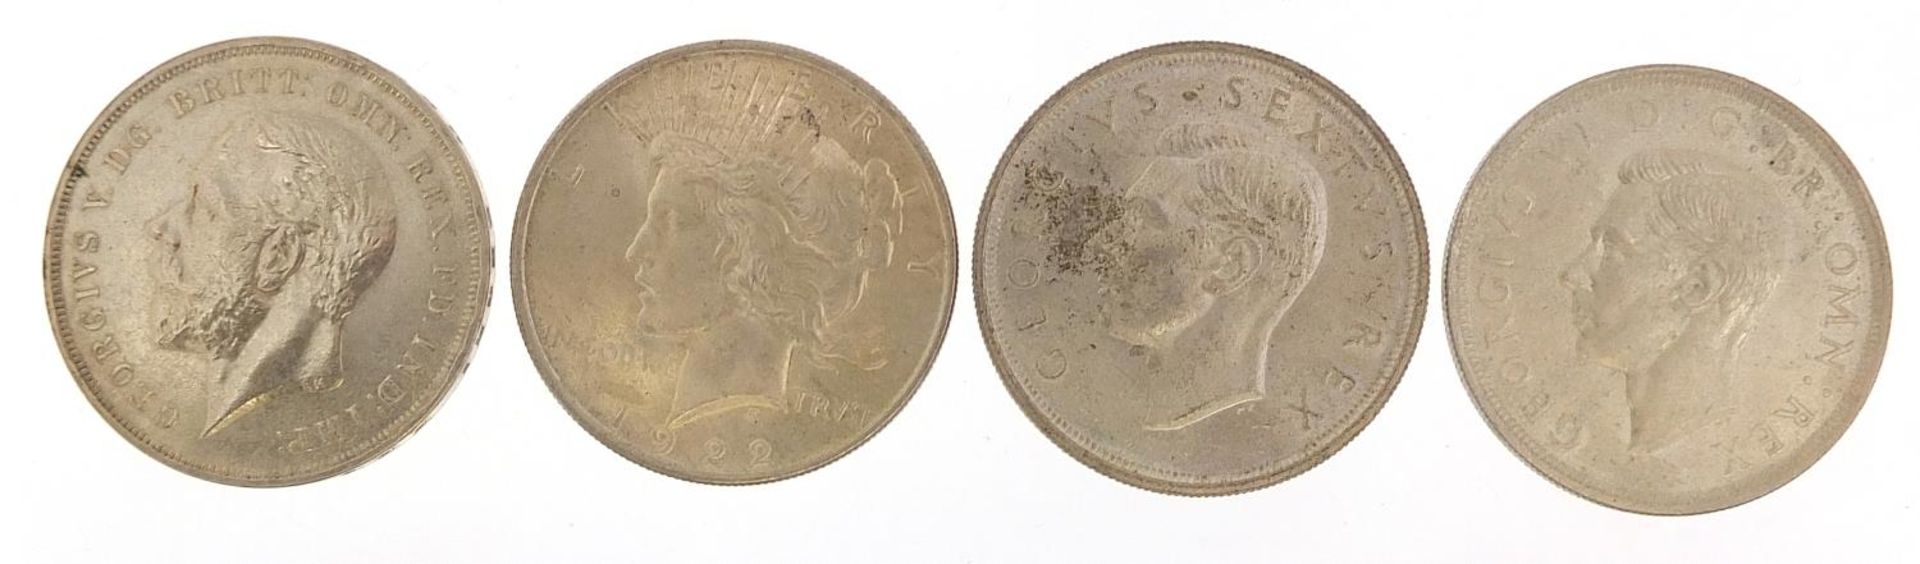 Two 1935 Rocking Horse crowns, 1922 dollar and 1952 South African example - Image 2 of 5